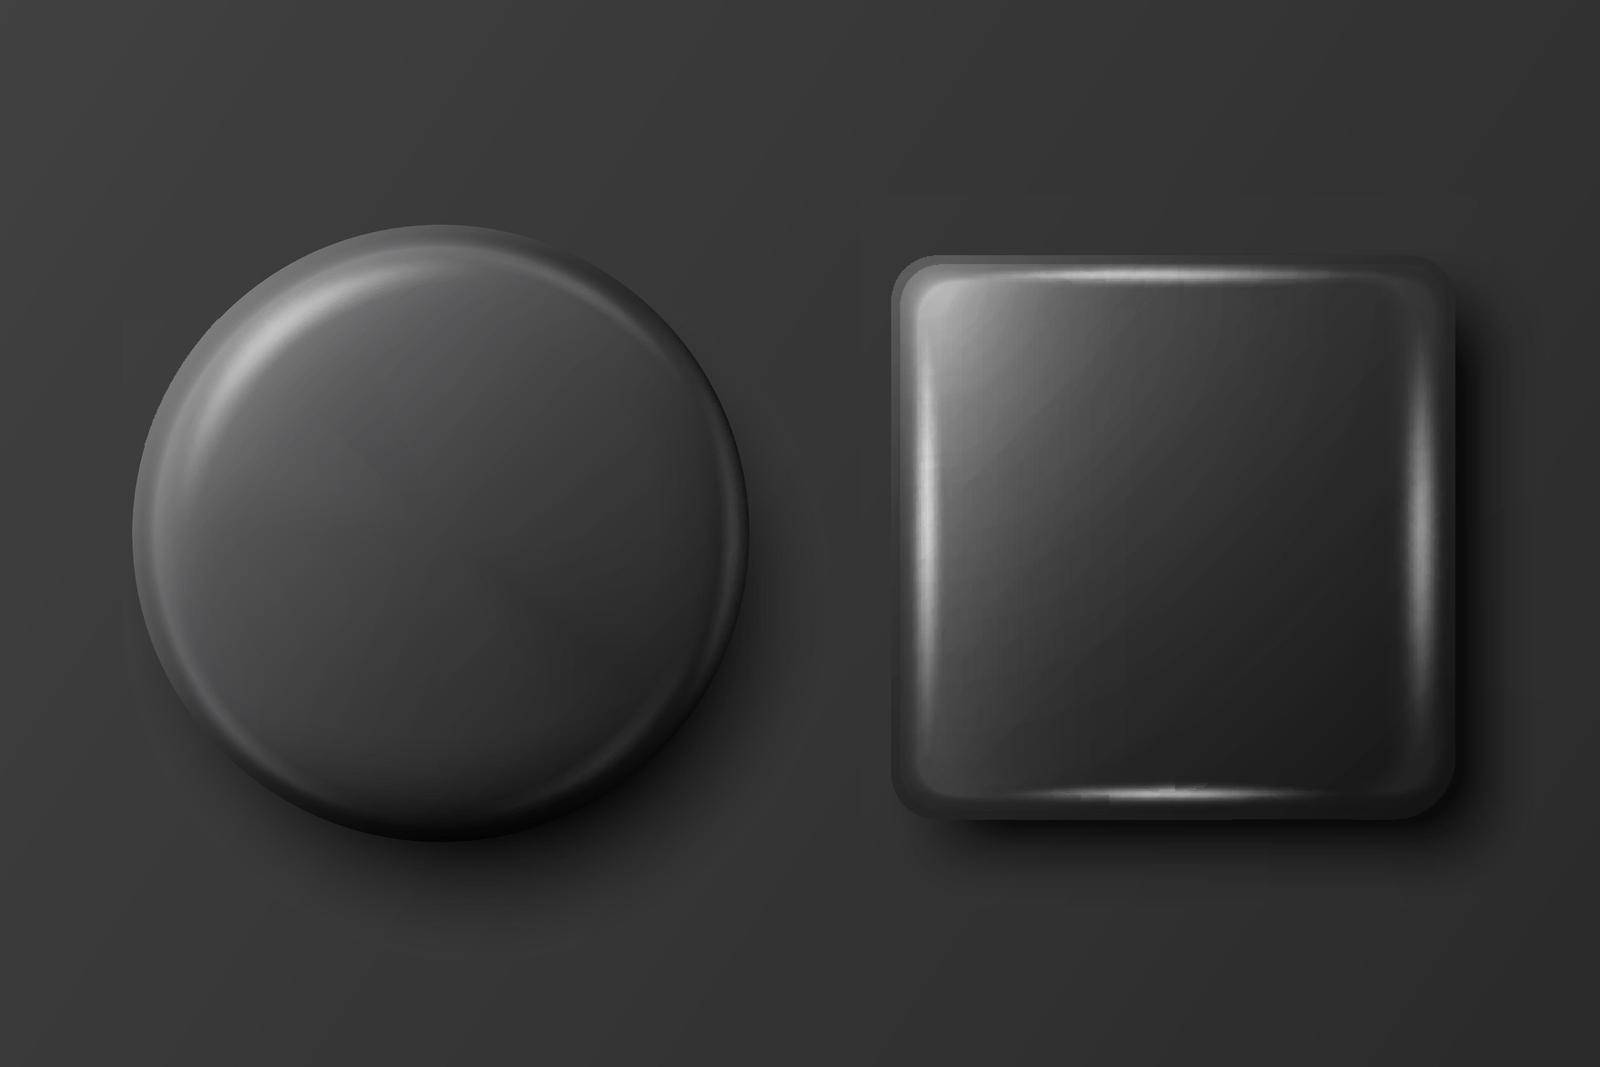 Vector 3d Realistic Round and Square Black Metal, Plastic Blank Empty Button Badge Set Isolated - Front View. Button Pin Badge. Glossy Brooch Pin. Top View. Template for Branding, Mock-up.